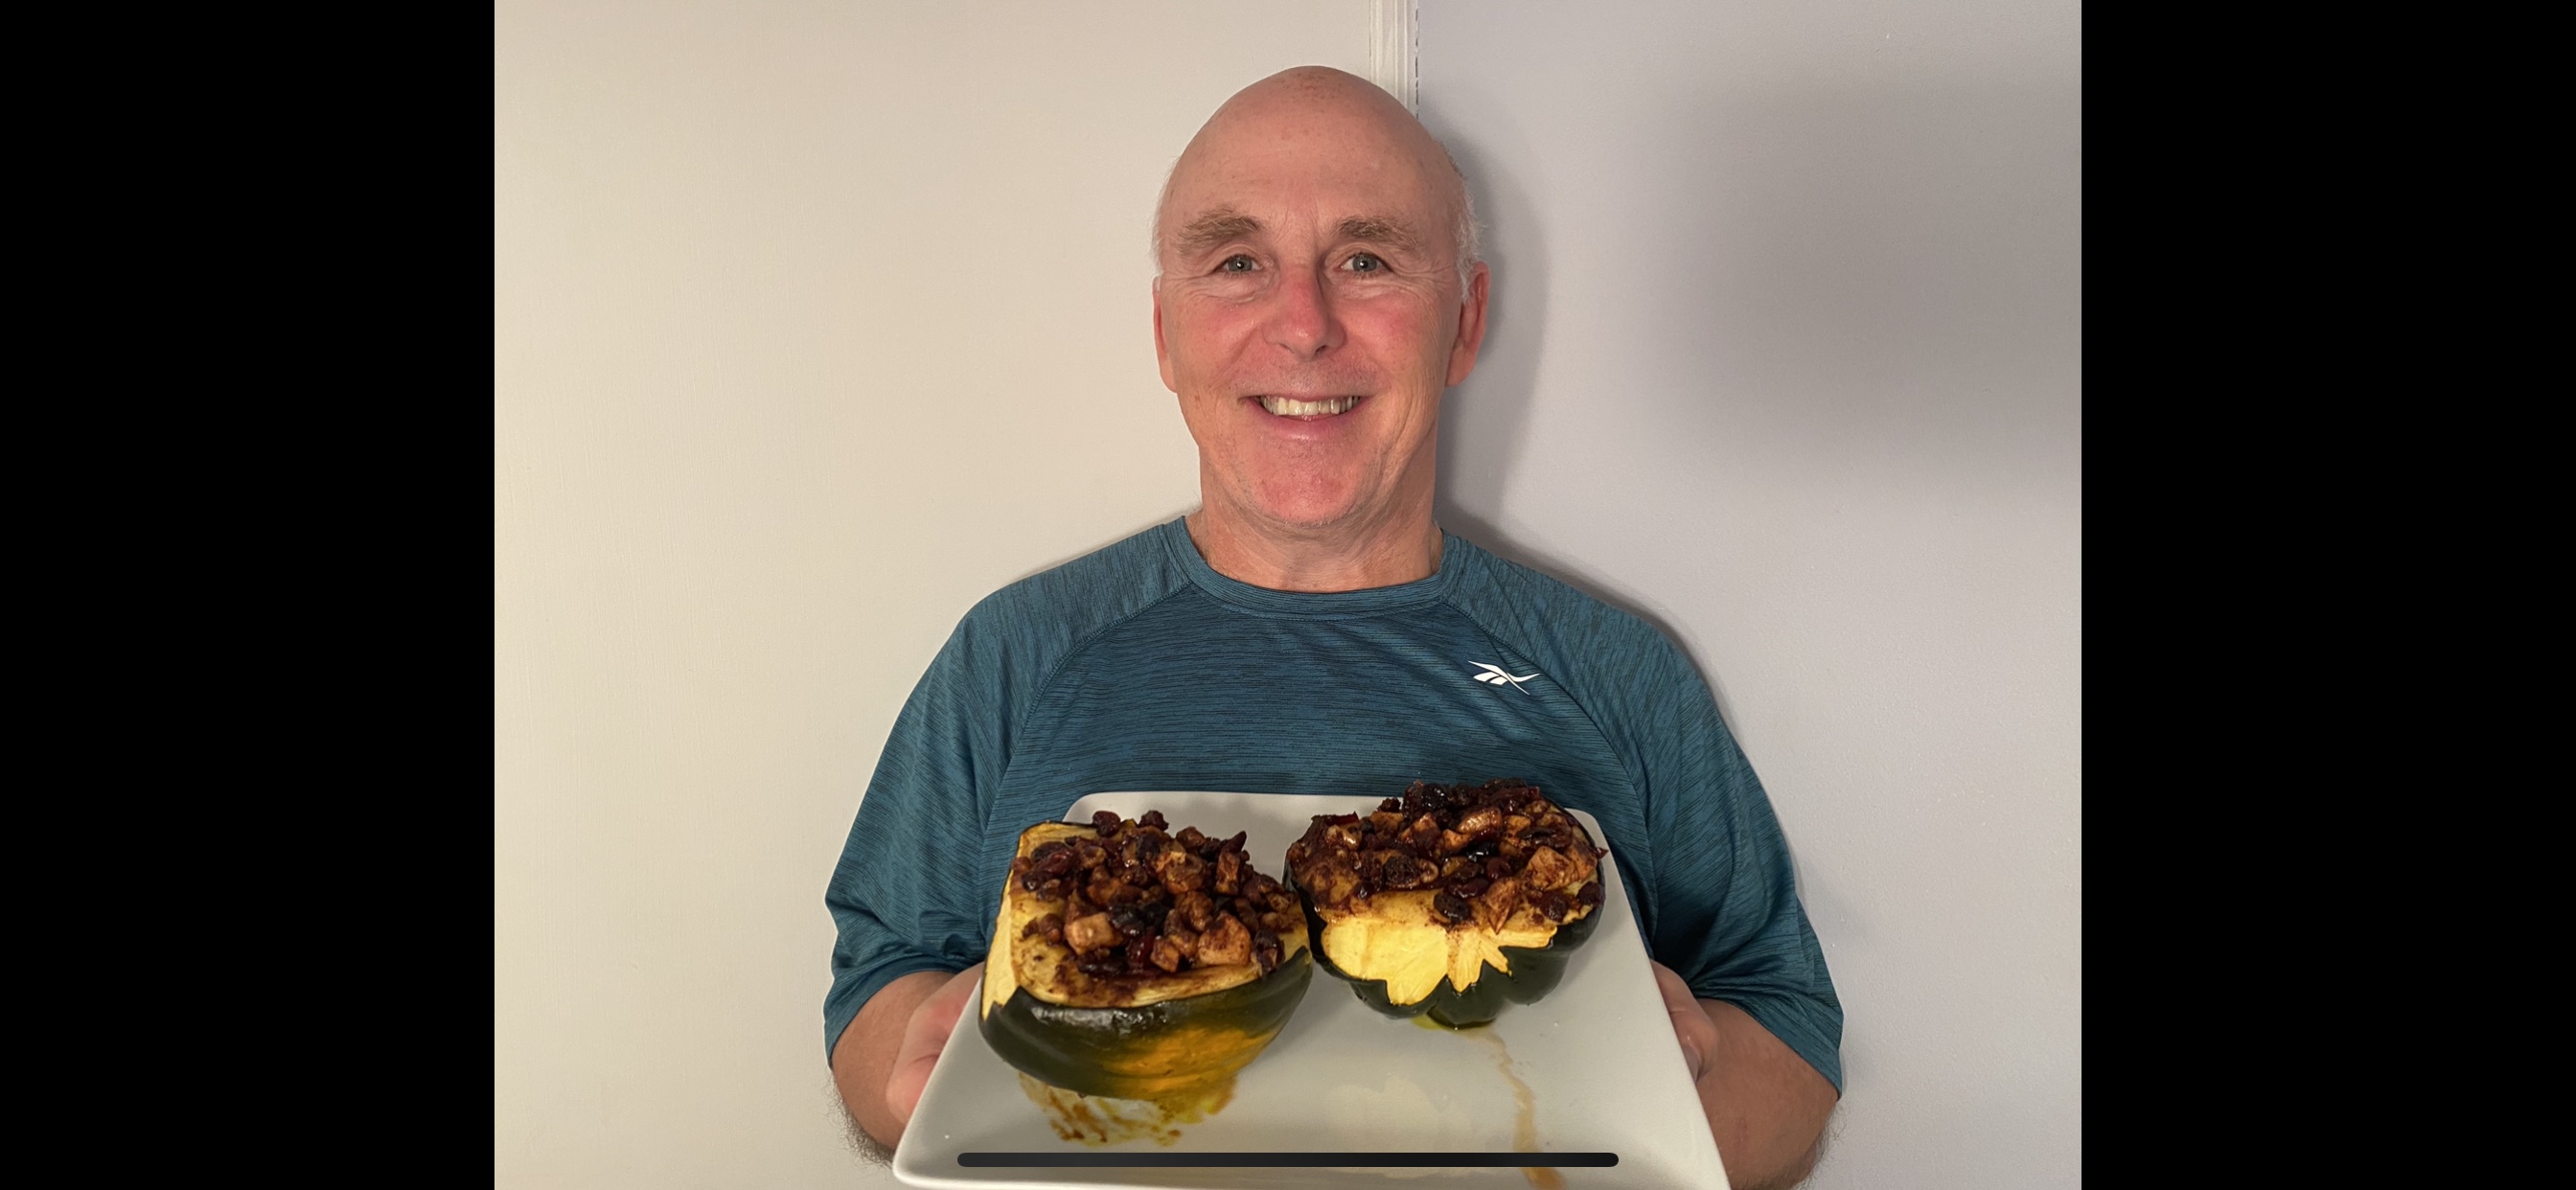 Chef Rob holding a plate of his stuffed acorn squash dish.